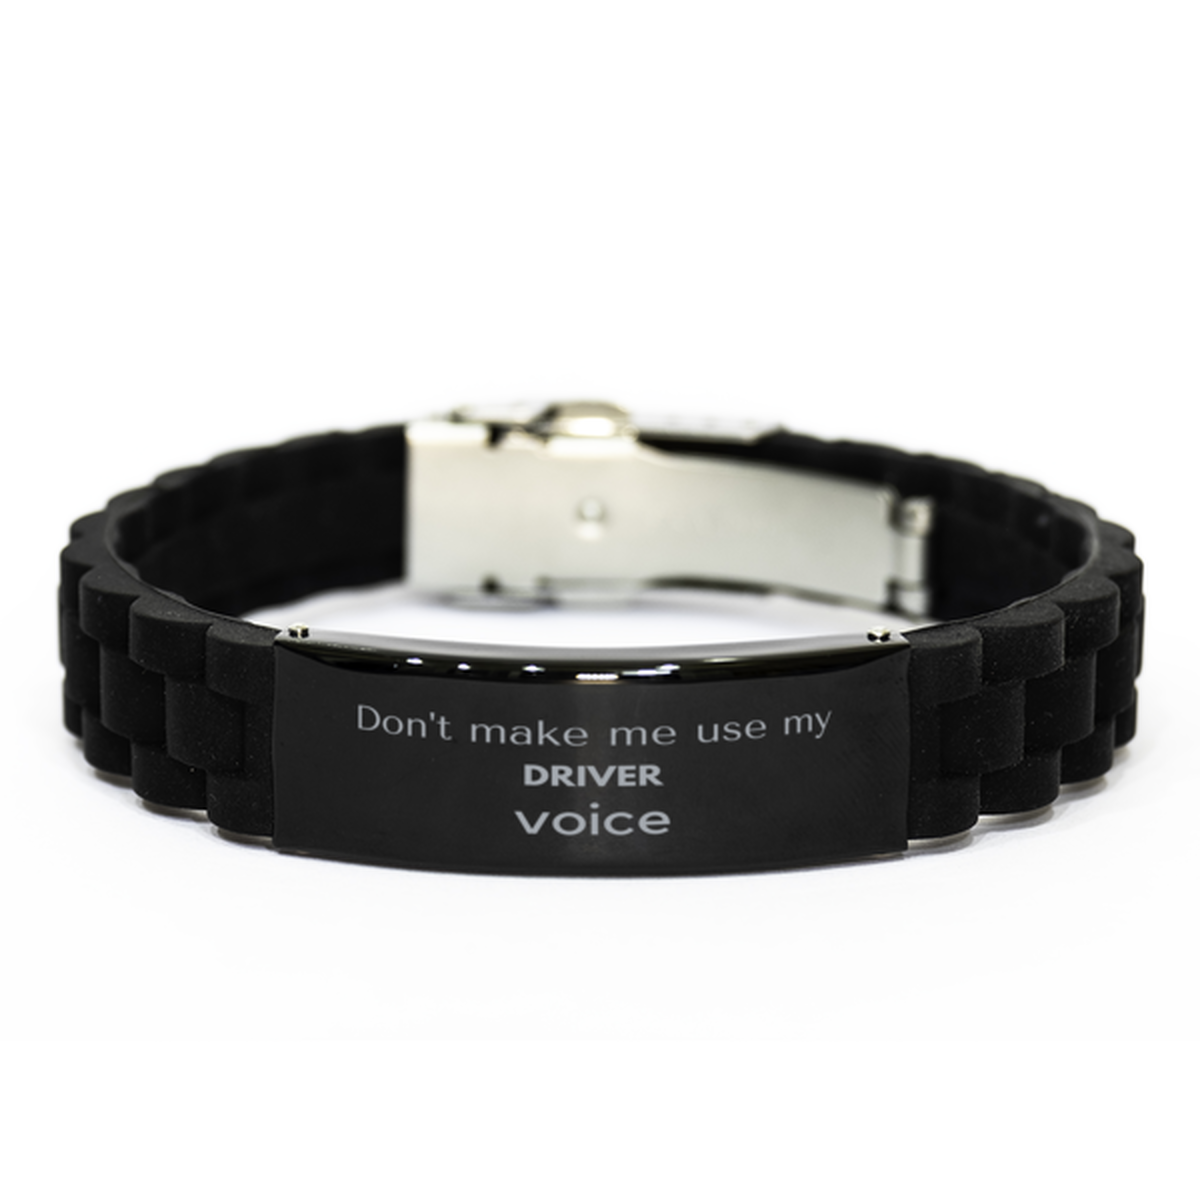 Don't make me use my Driver voice, Sarcasm Driver Gifts, Christmas Driver Black Glidelock Clasp Bracelet Birthday Unique Gifts For Driver Coworkers, Men, Women, Colleague, Friends